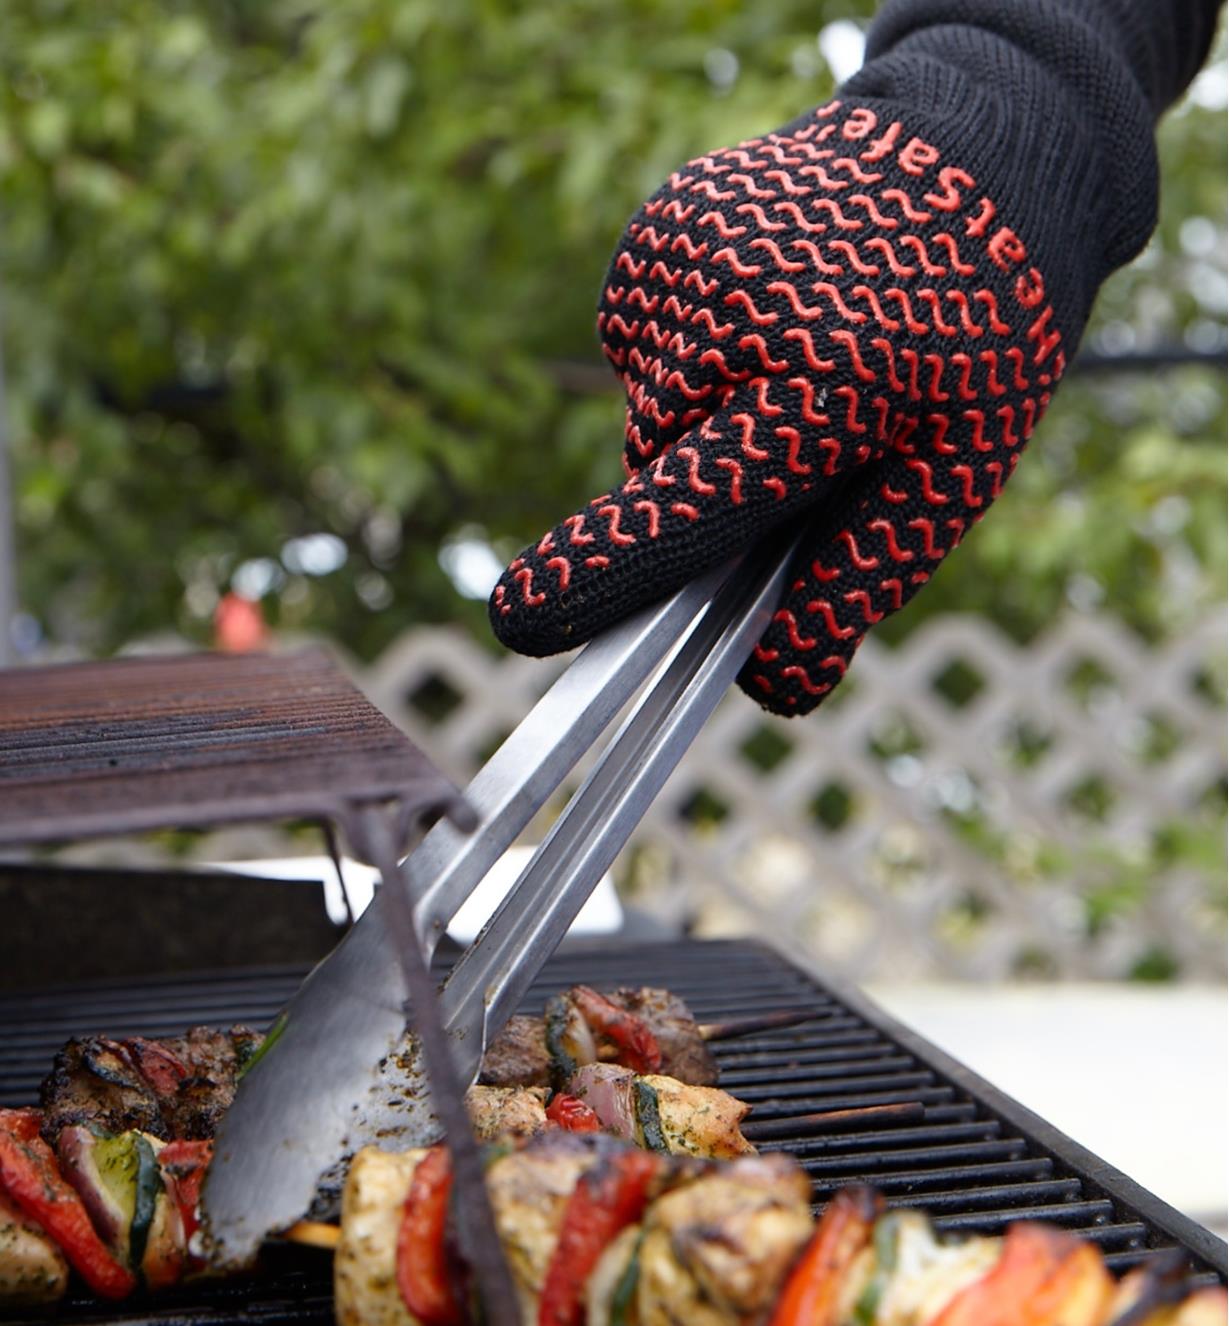 Wearing barbecue gloves while using tongs to turn food on barbecue.